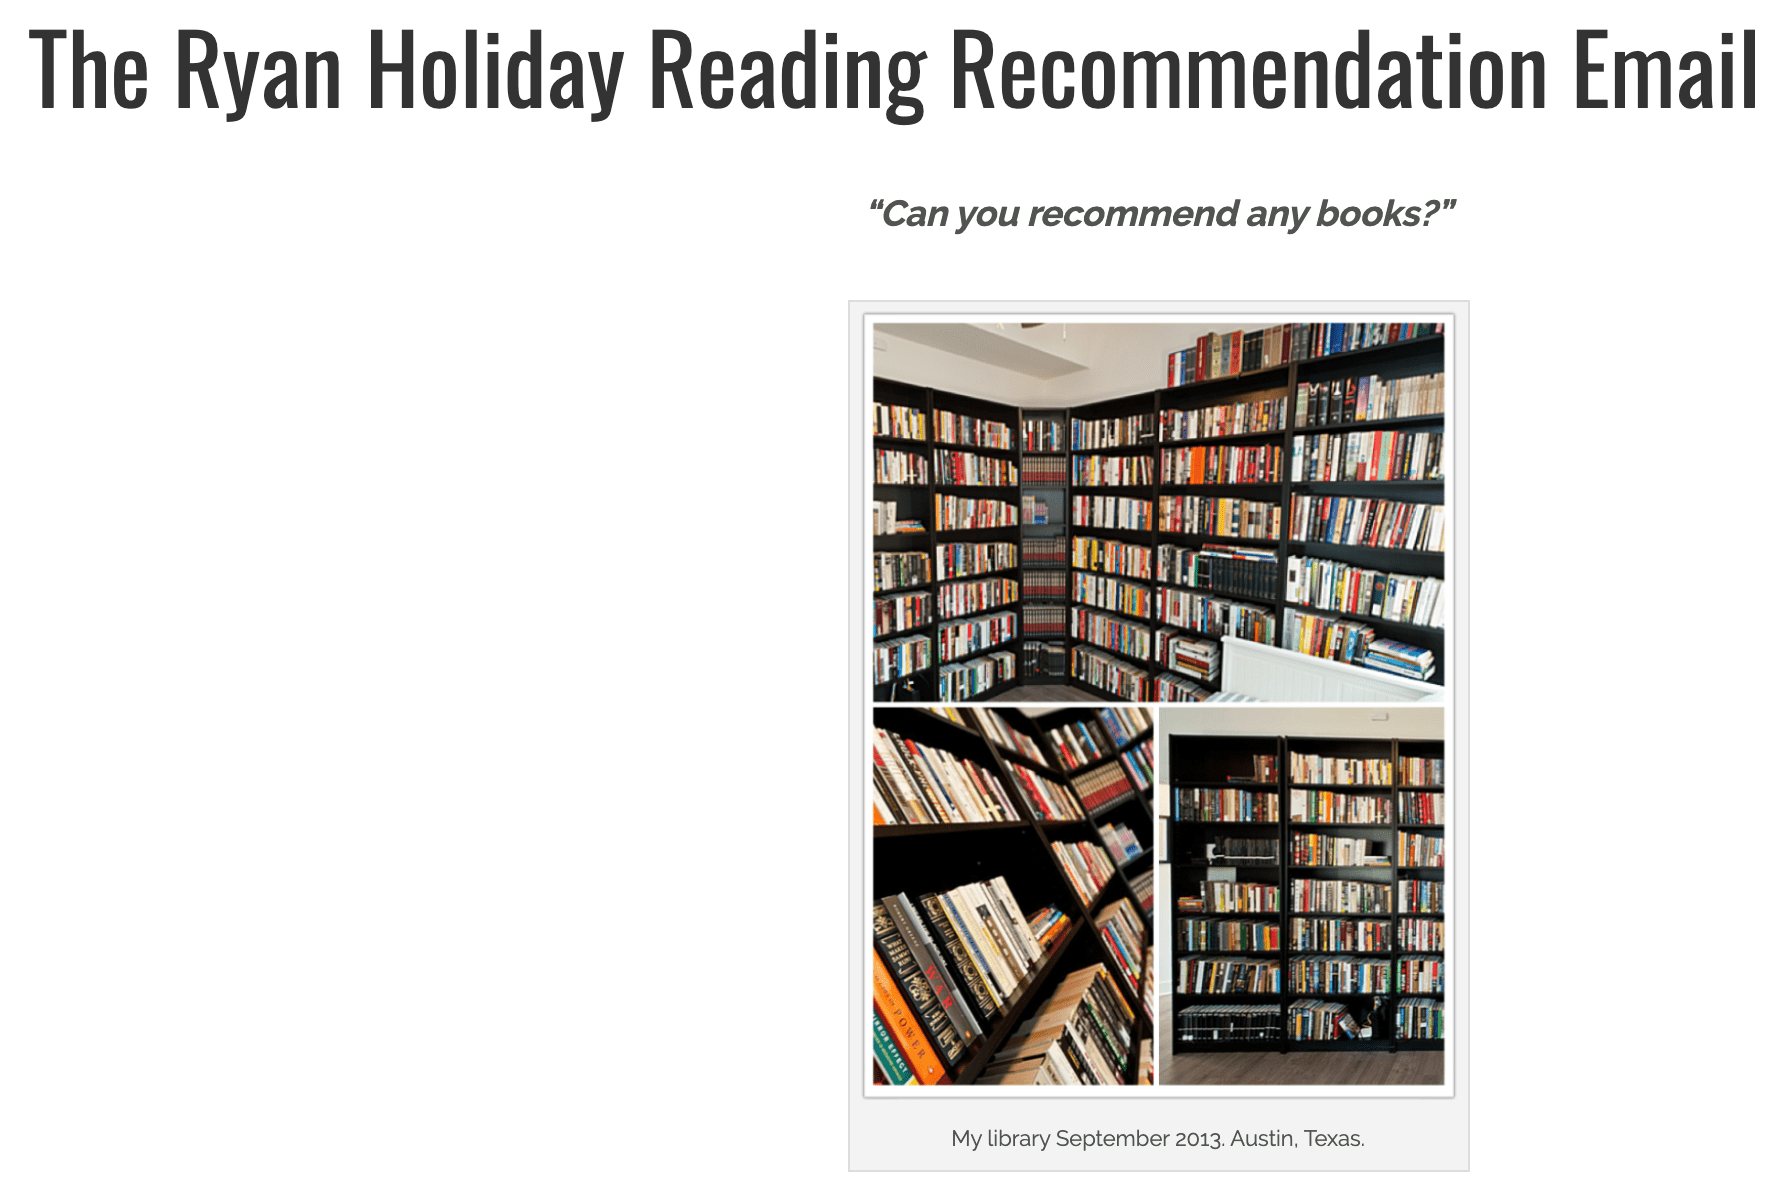 Ryan Holiday Reading Recommendation Email